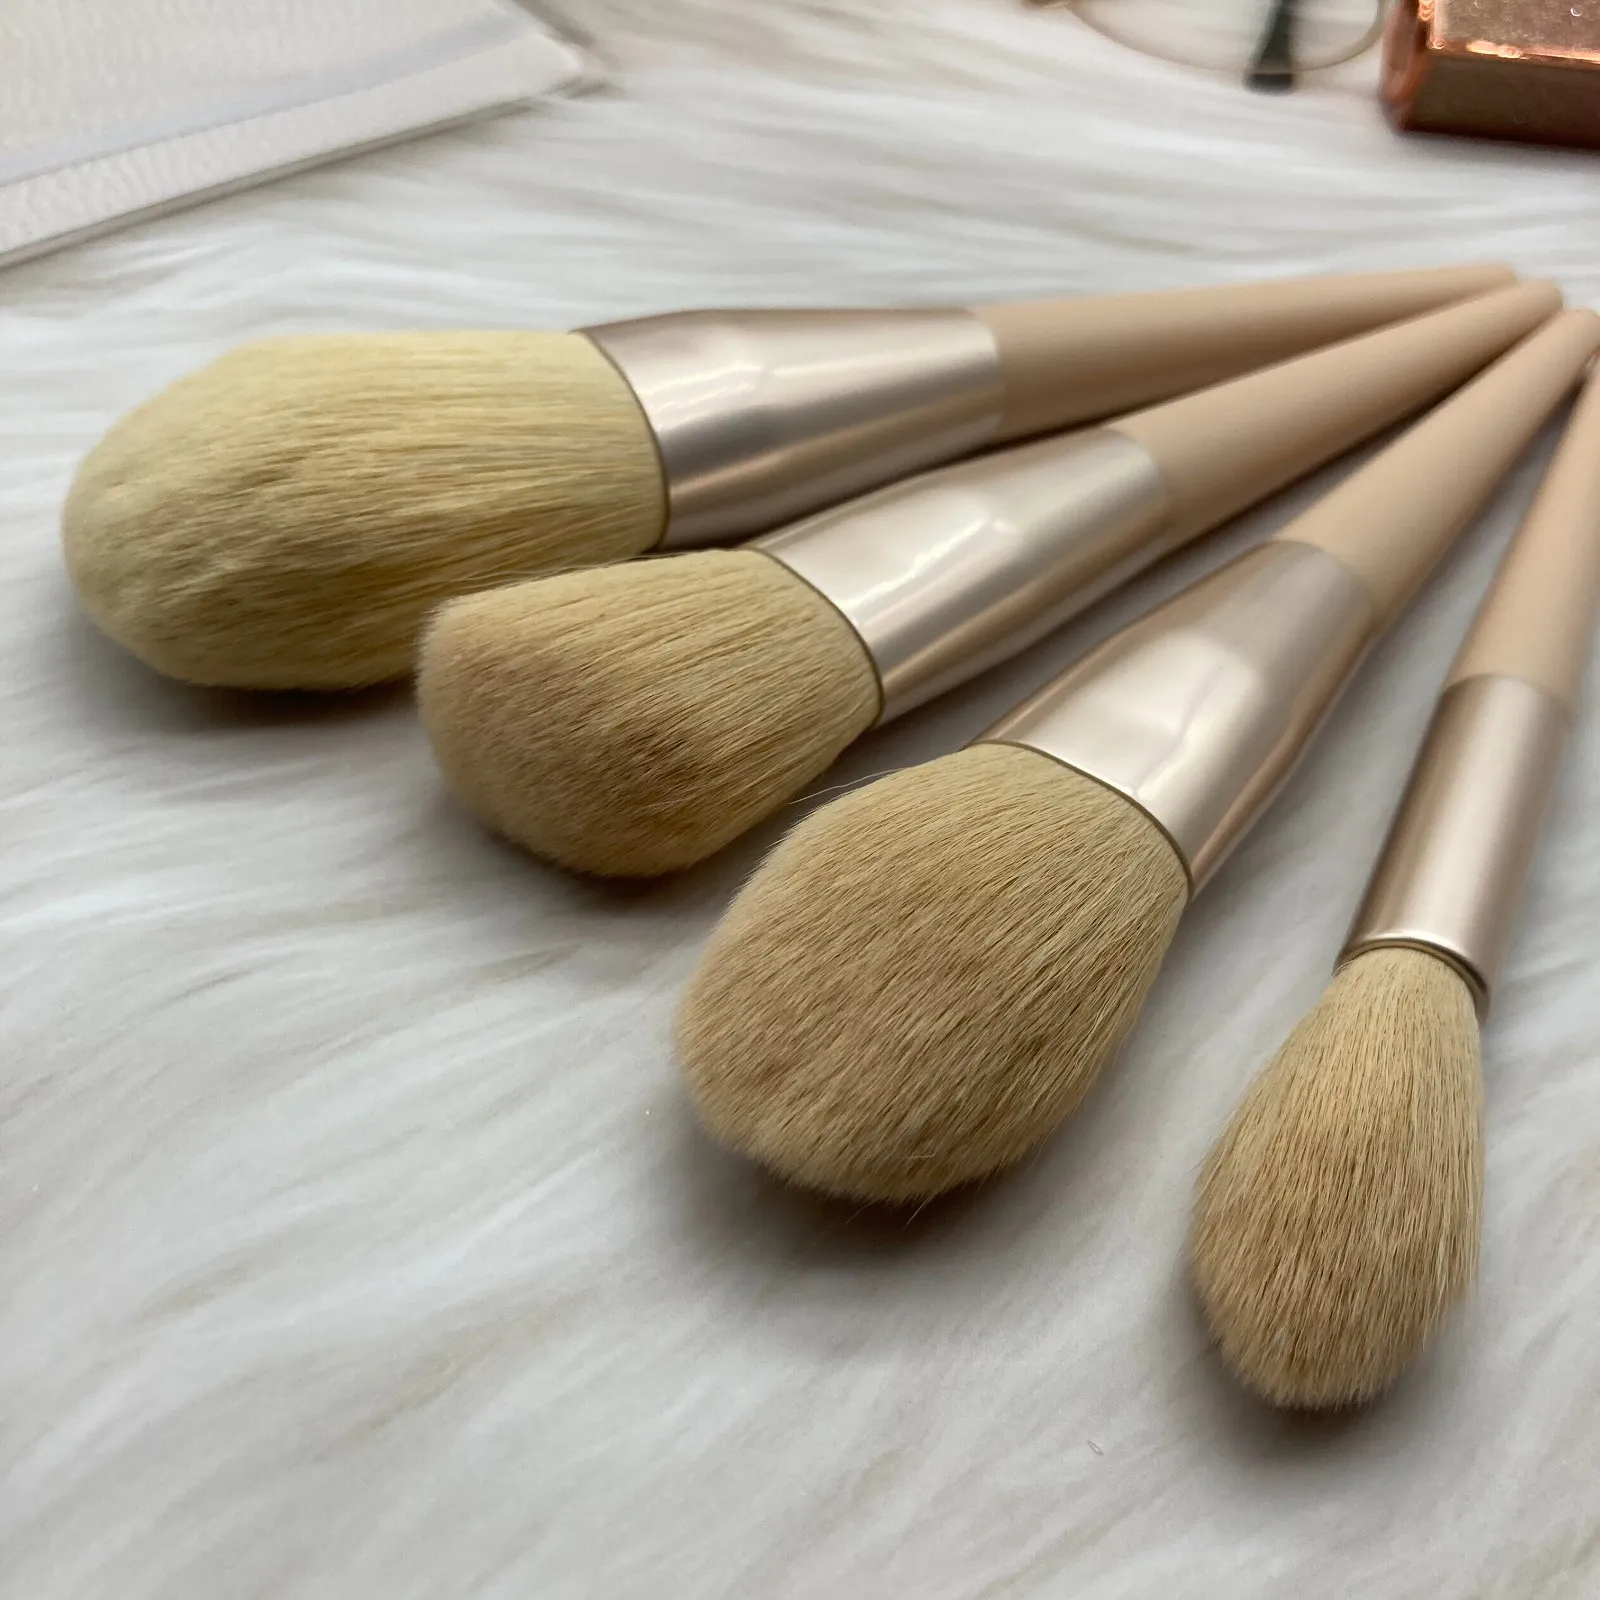 durable makeup brush kit factory direct supply for sale